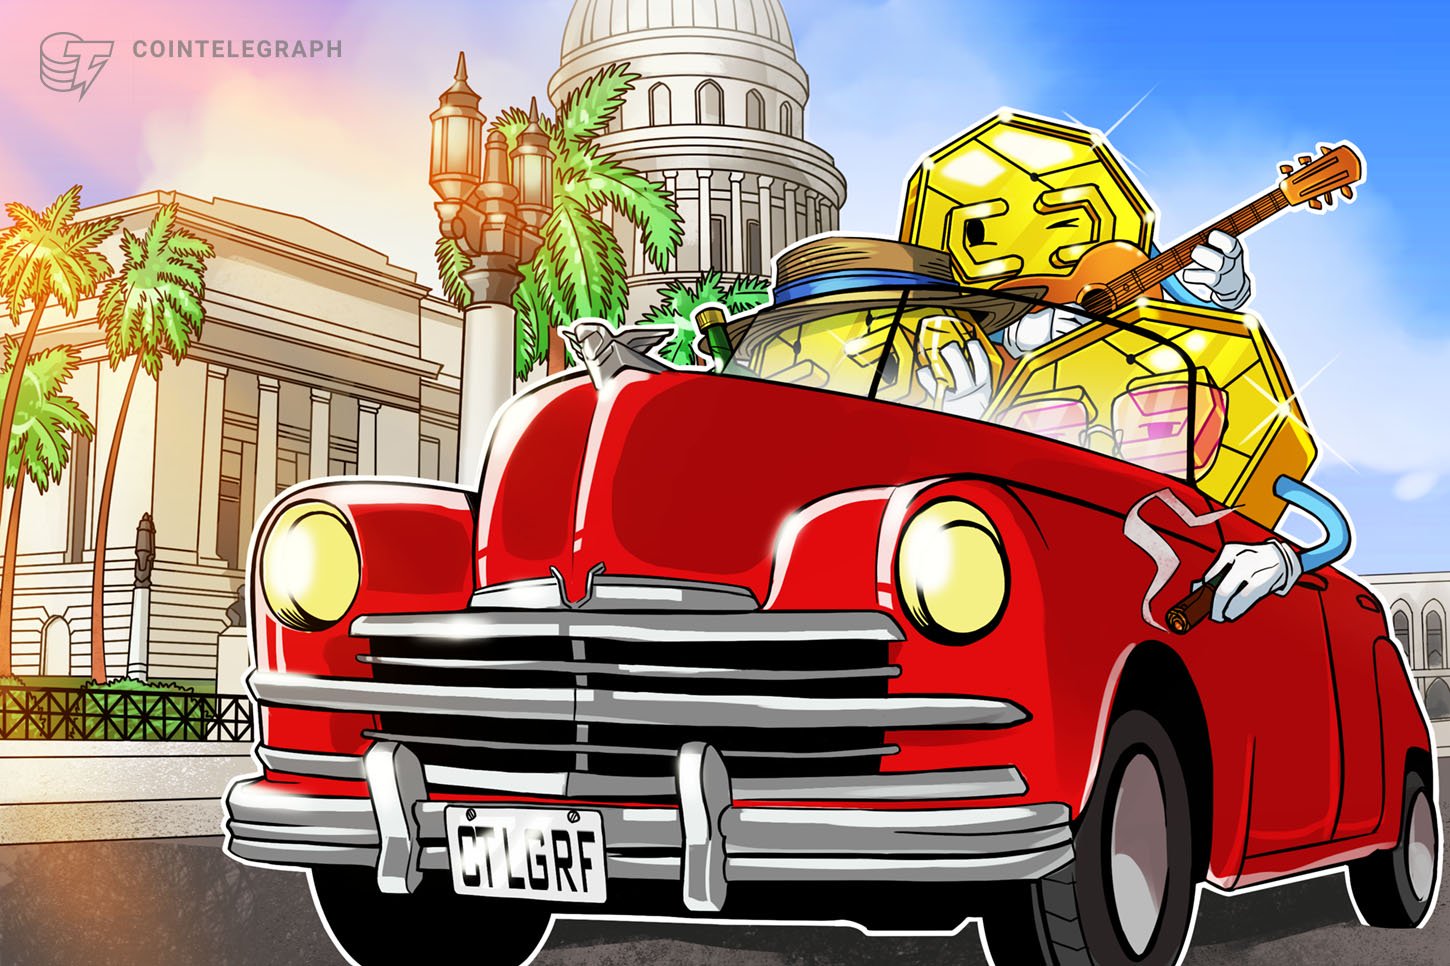 Cuba’s First P2P Bitcoin Alternate Launches Amid Regulatory Uncertainty